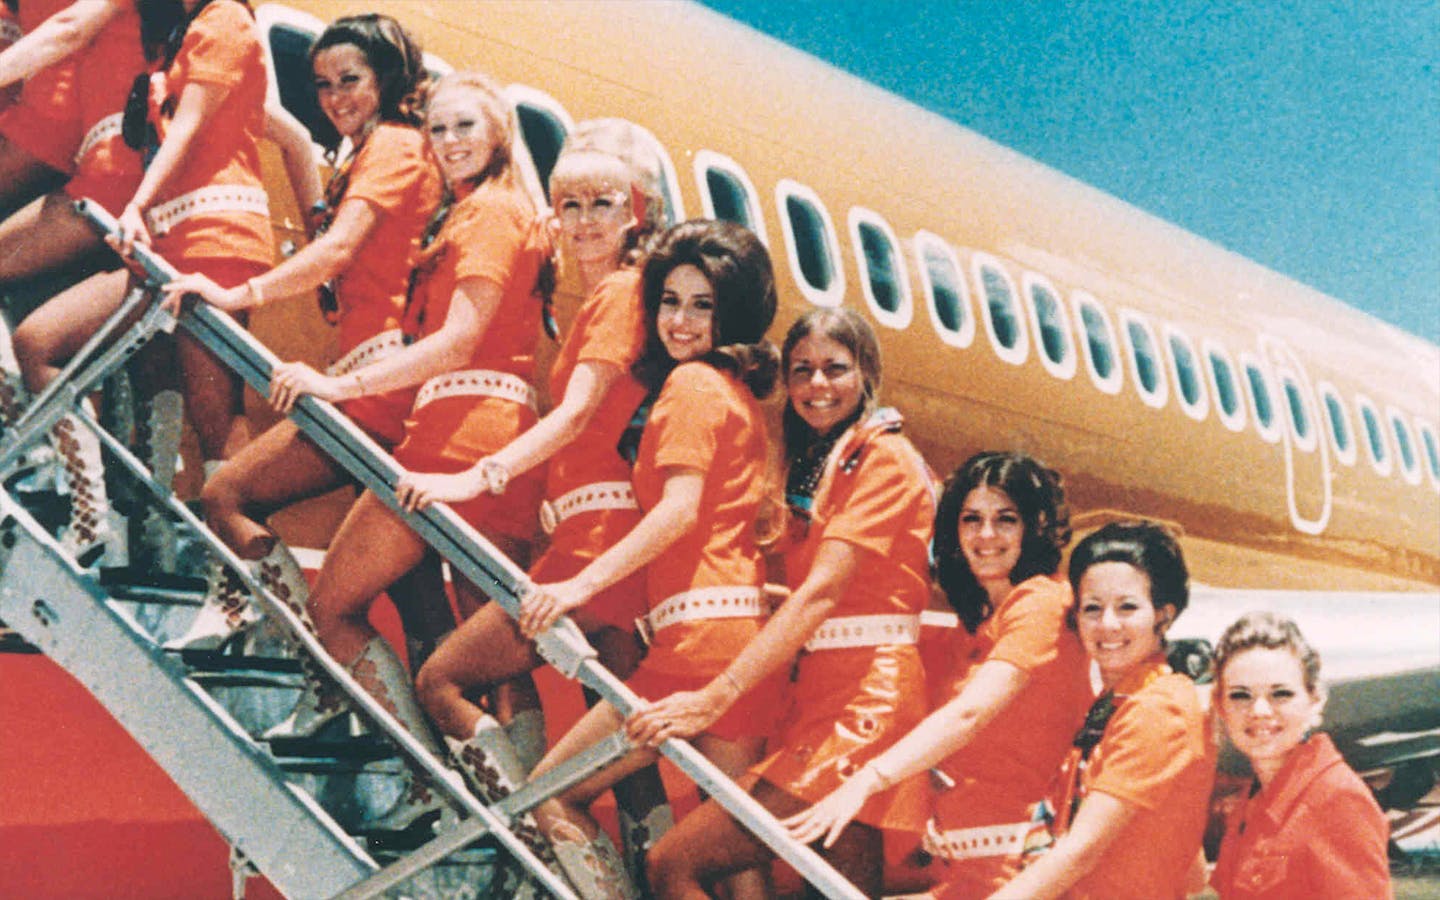 American Airlines Sex Video - Hot Pants, Love Potions, and the Go-go Genesis of Southwest Airlines â€“  Texas Monthly